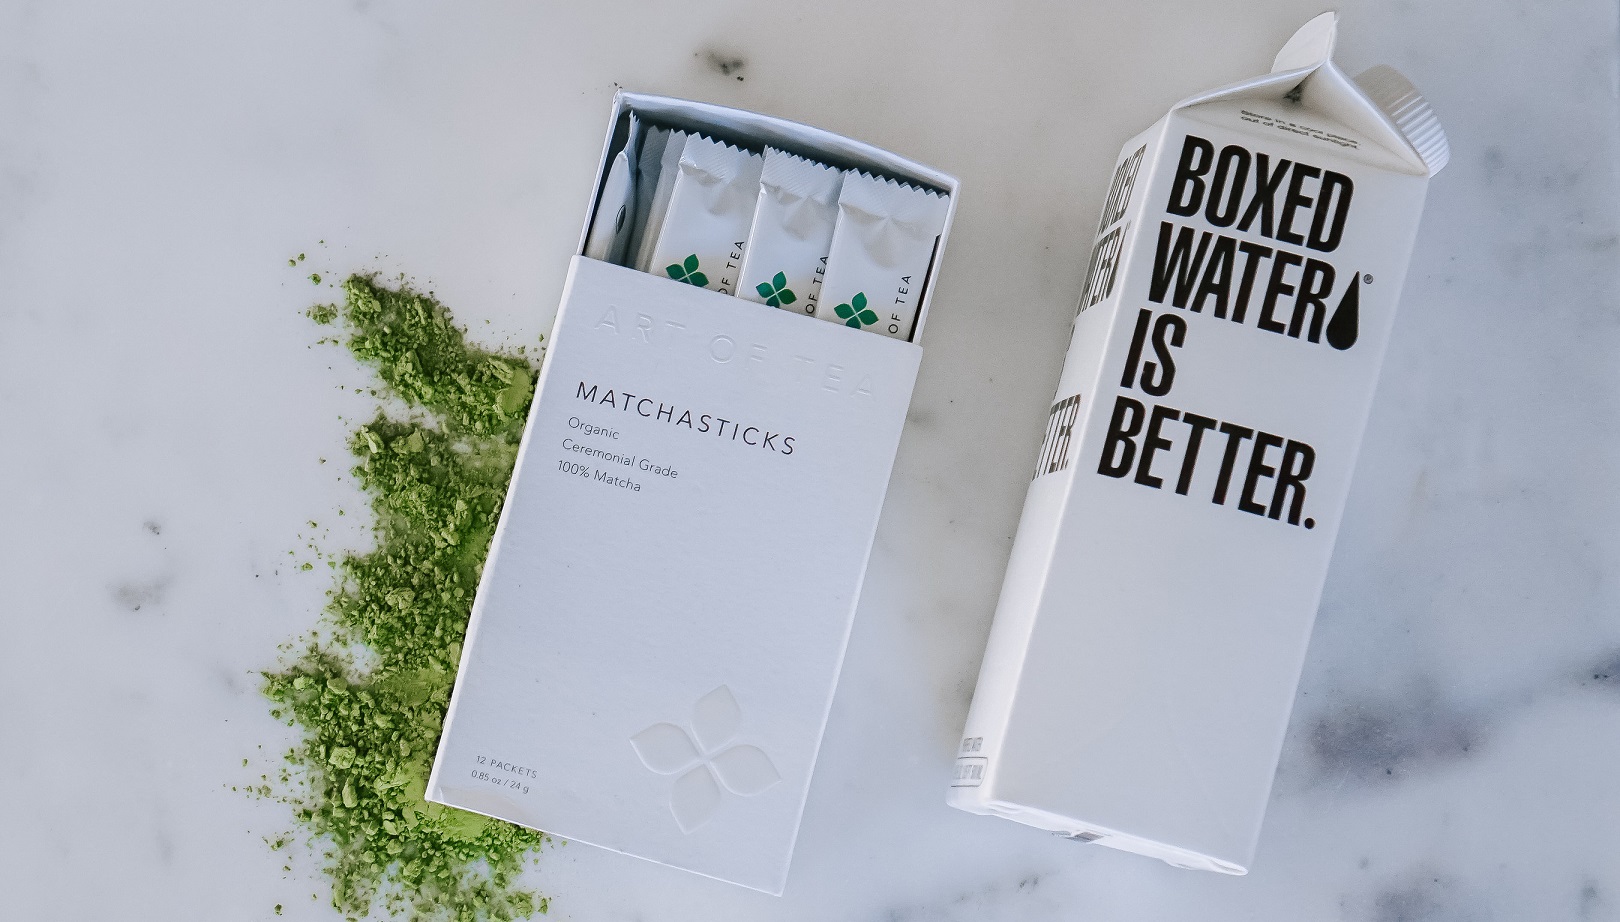 Boxed Water Is Better Launches Boxed Matcha